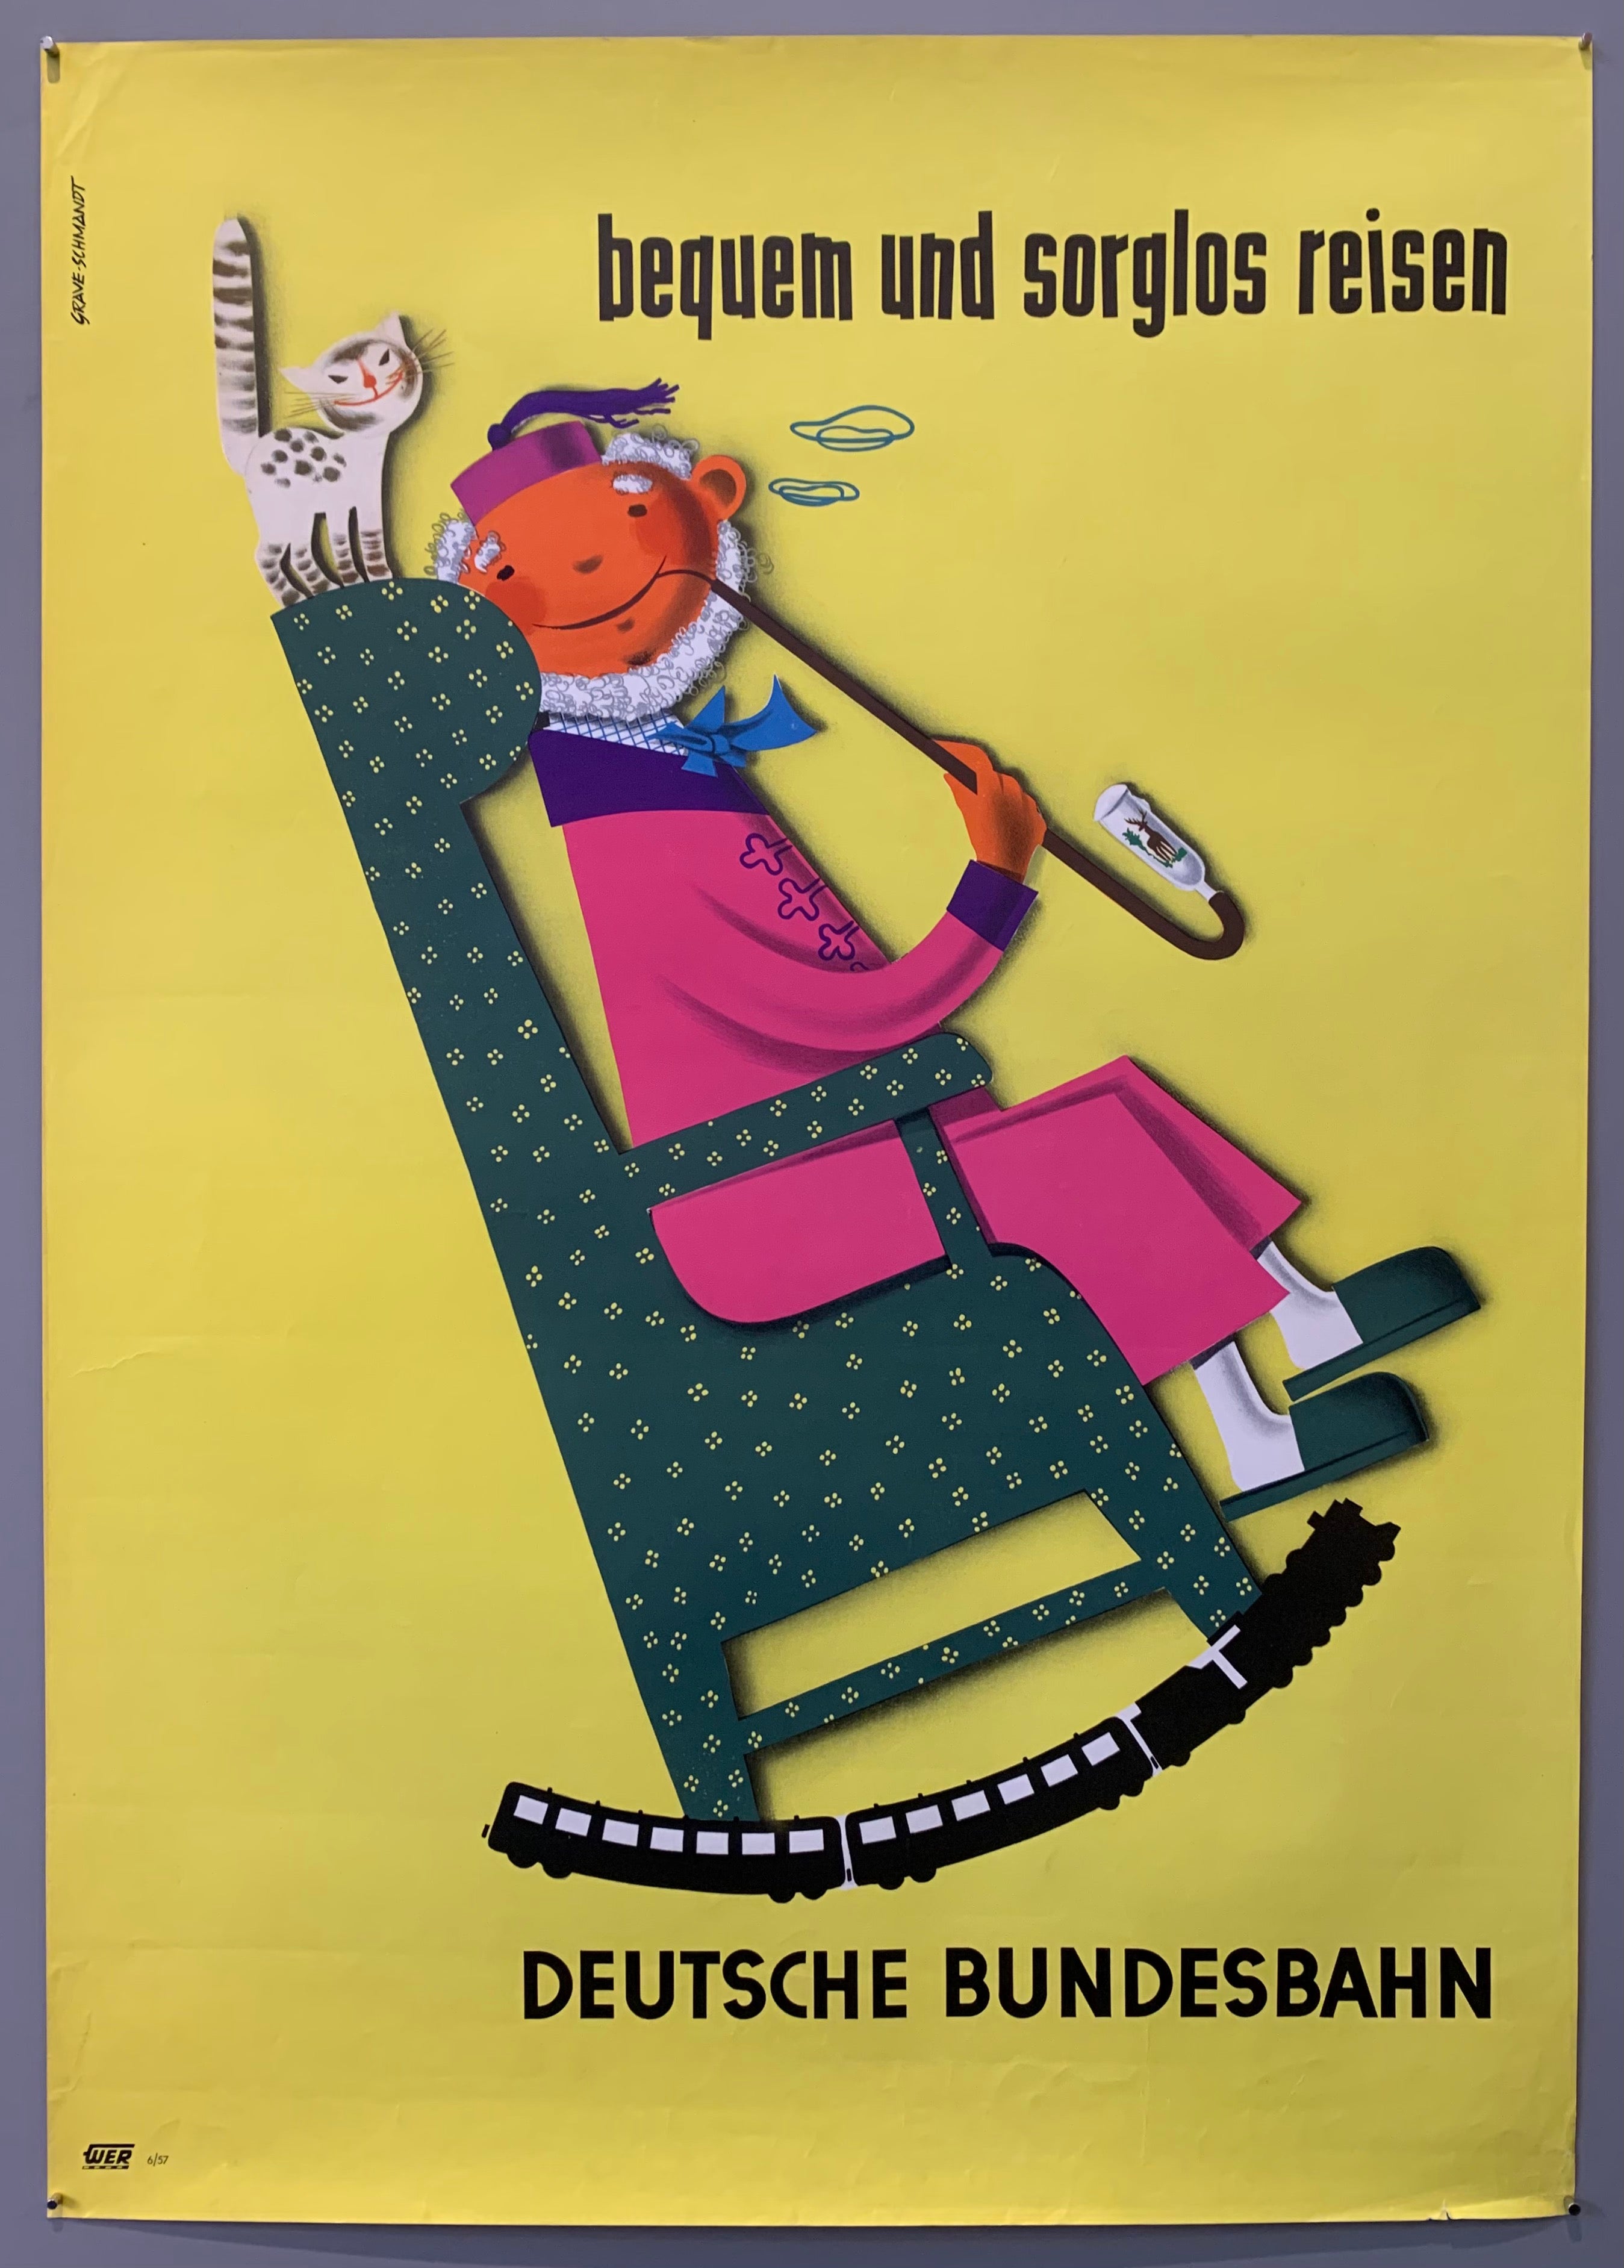 Poster for the Deutsche Bundesbahn advertising comfortable train travel. Pictured is a man in a robe smoking a pipe in a rocking chair with a cat.